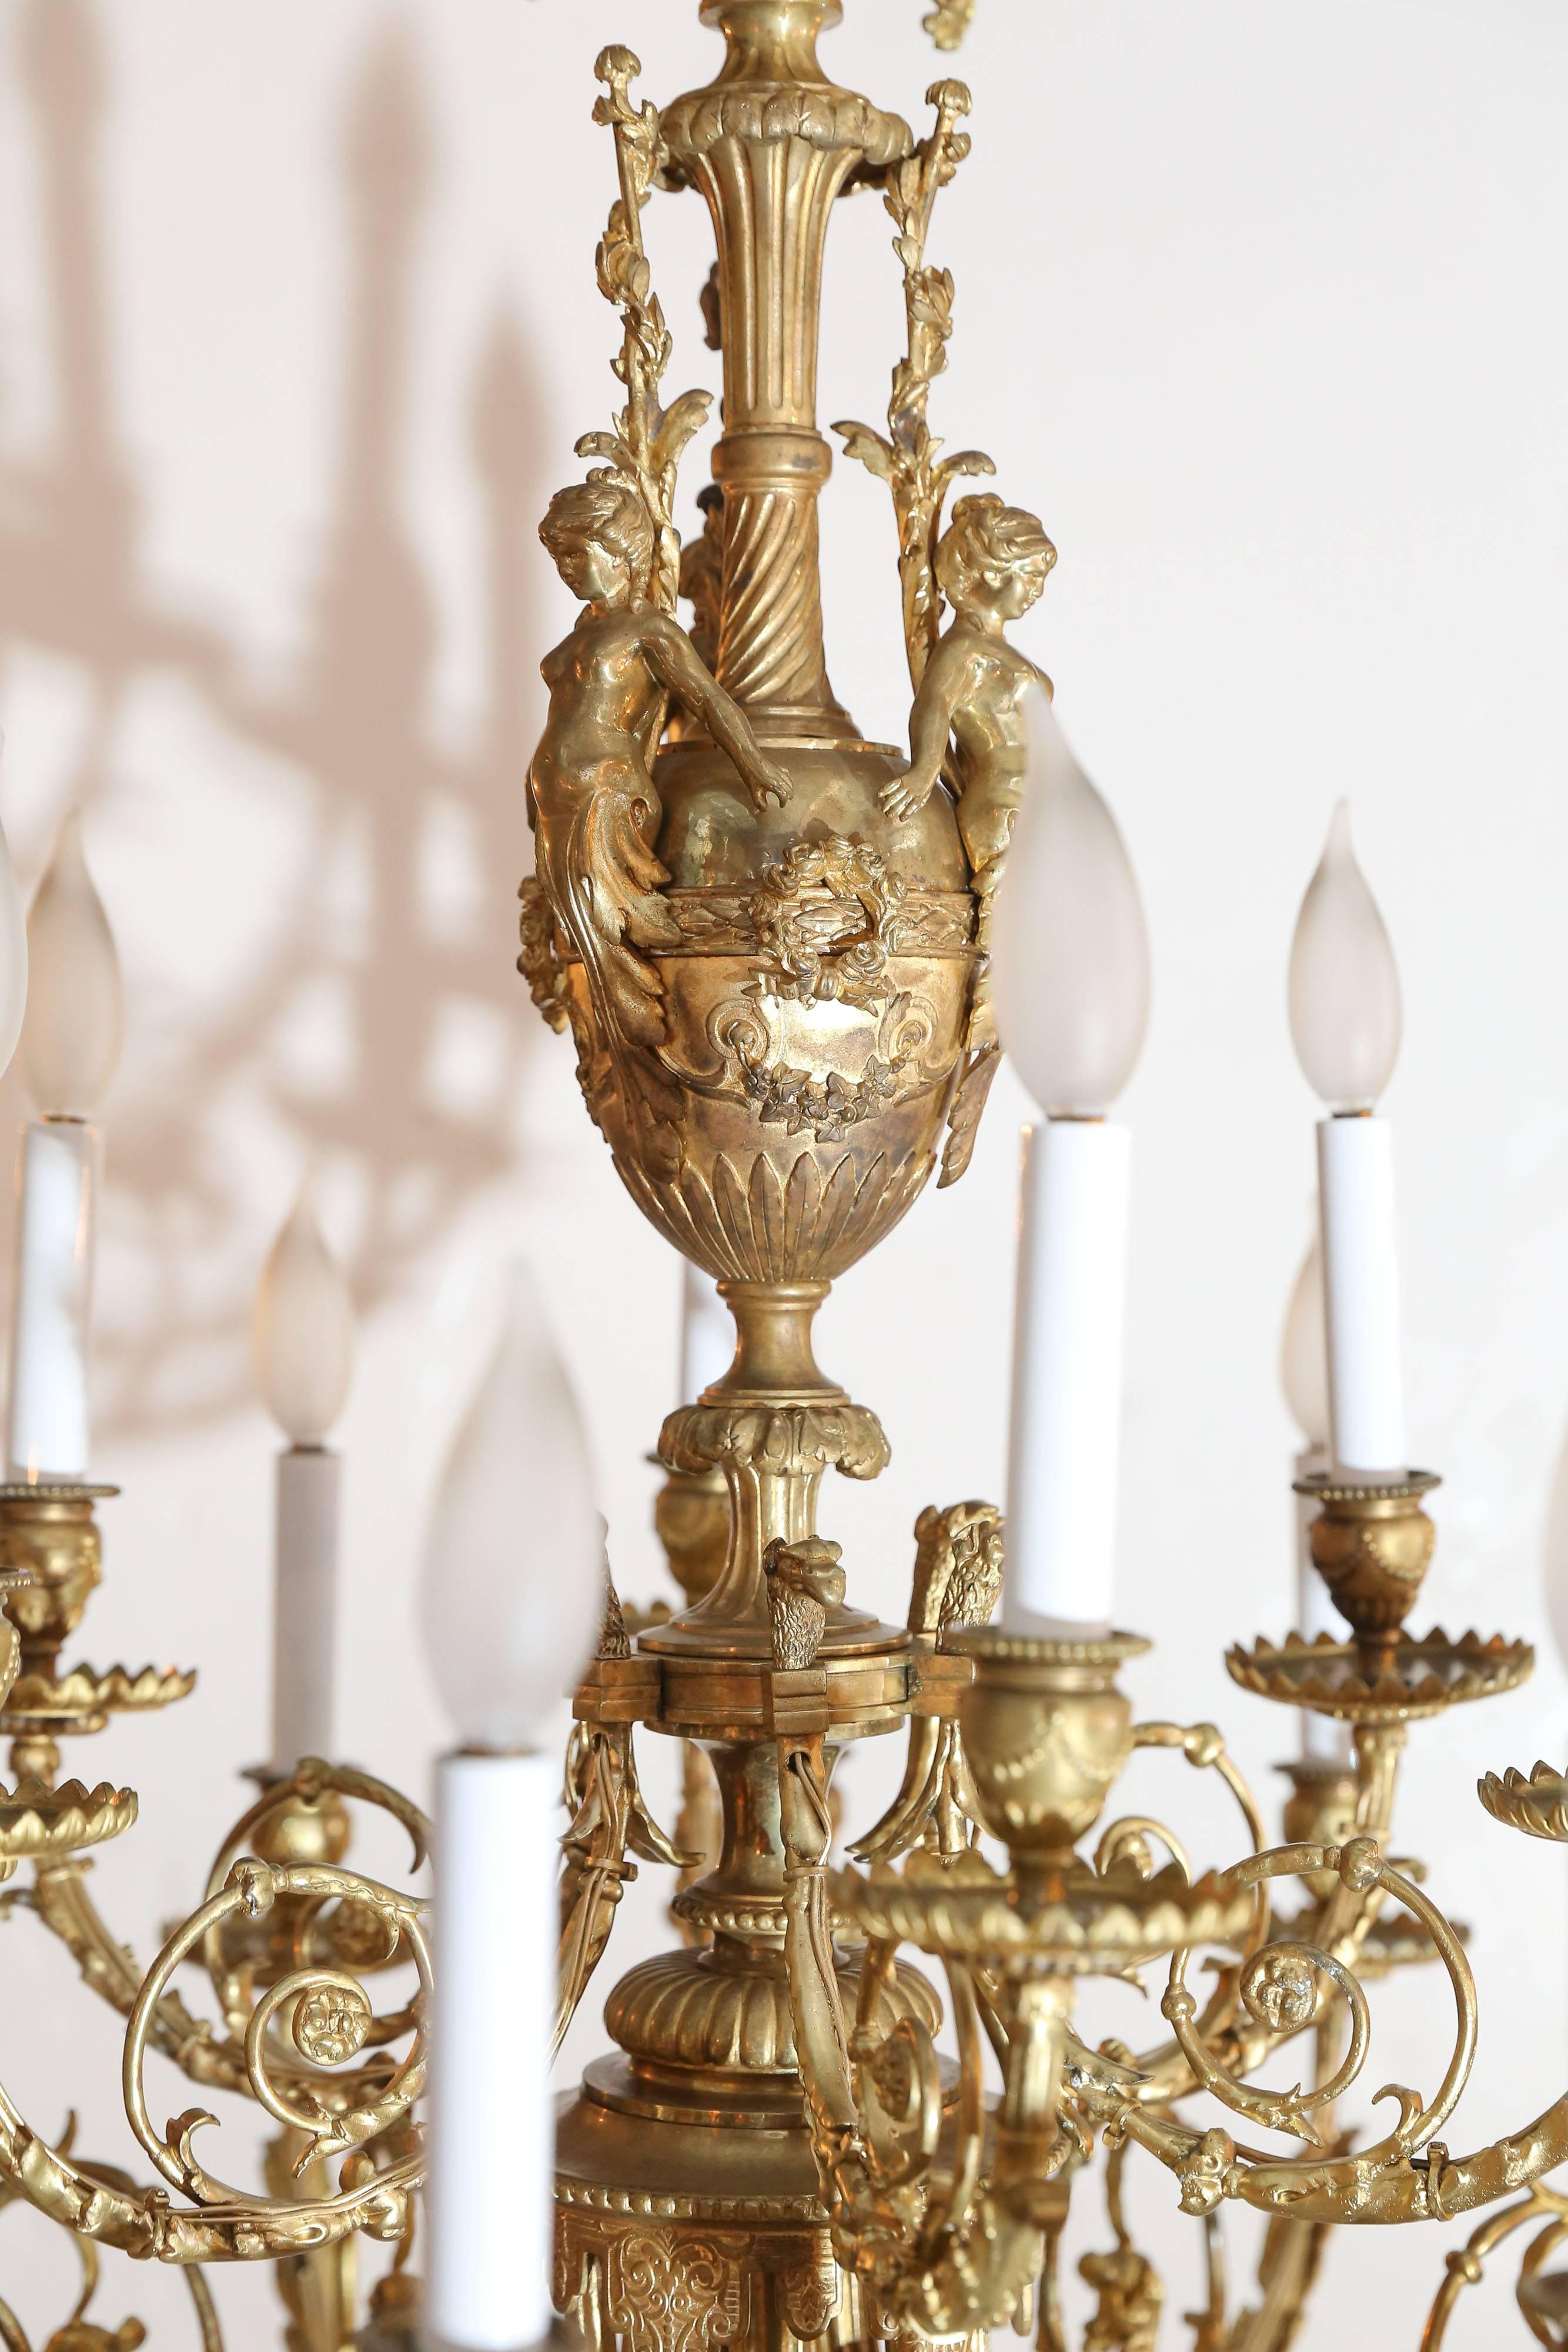 The details on this chandelier are exquisitely refined from the women figures on the top to the arms, bobeche and bottom finial.

Too many to describe.
Truly remarkable.